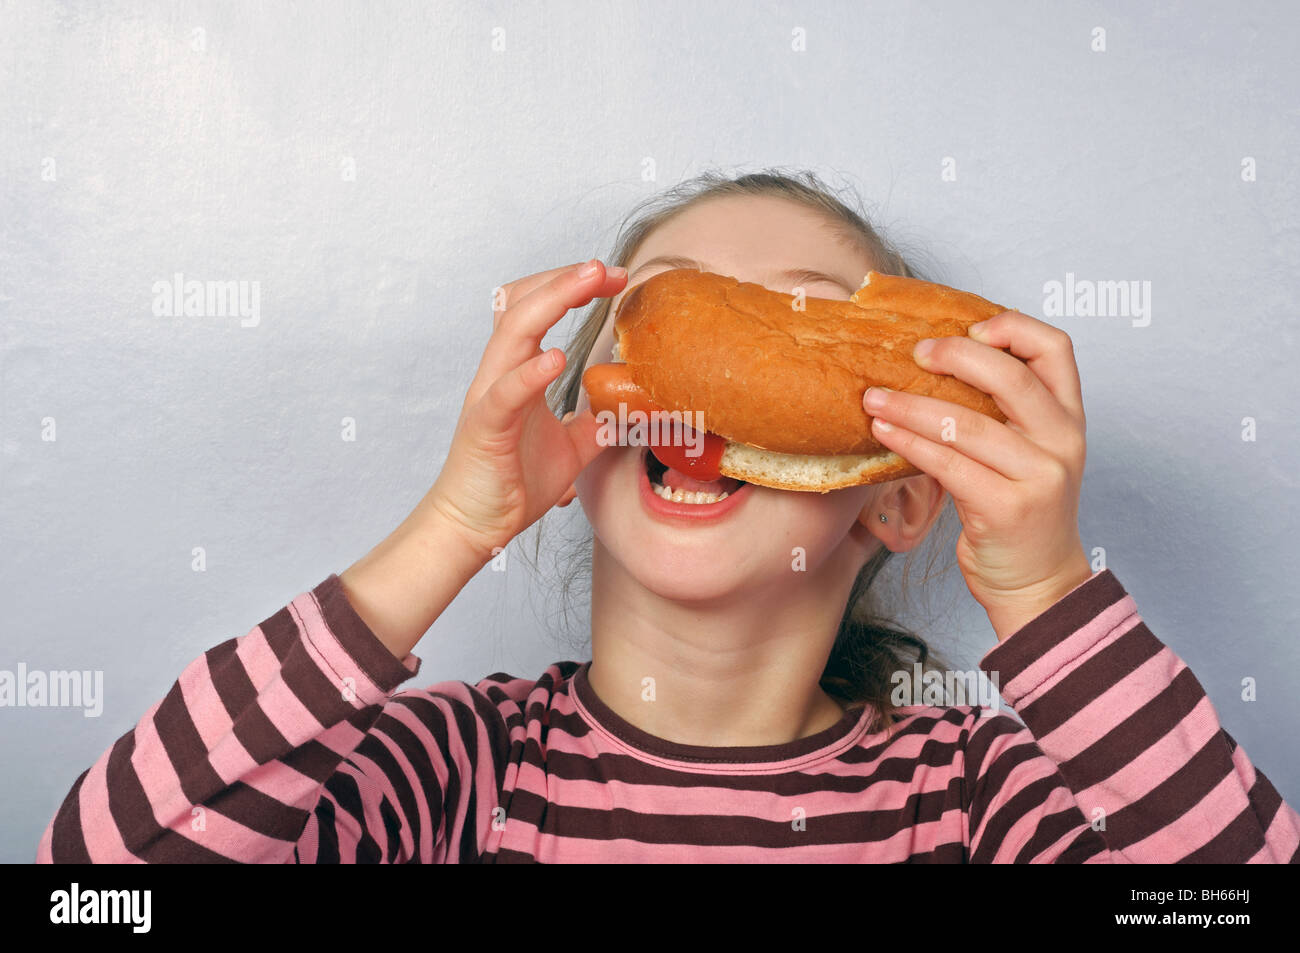 Young girl eating a hot-dog Stock Photo